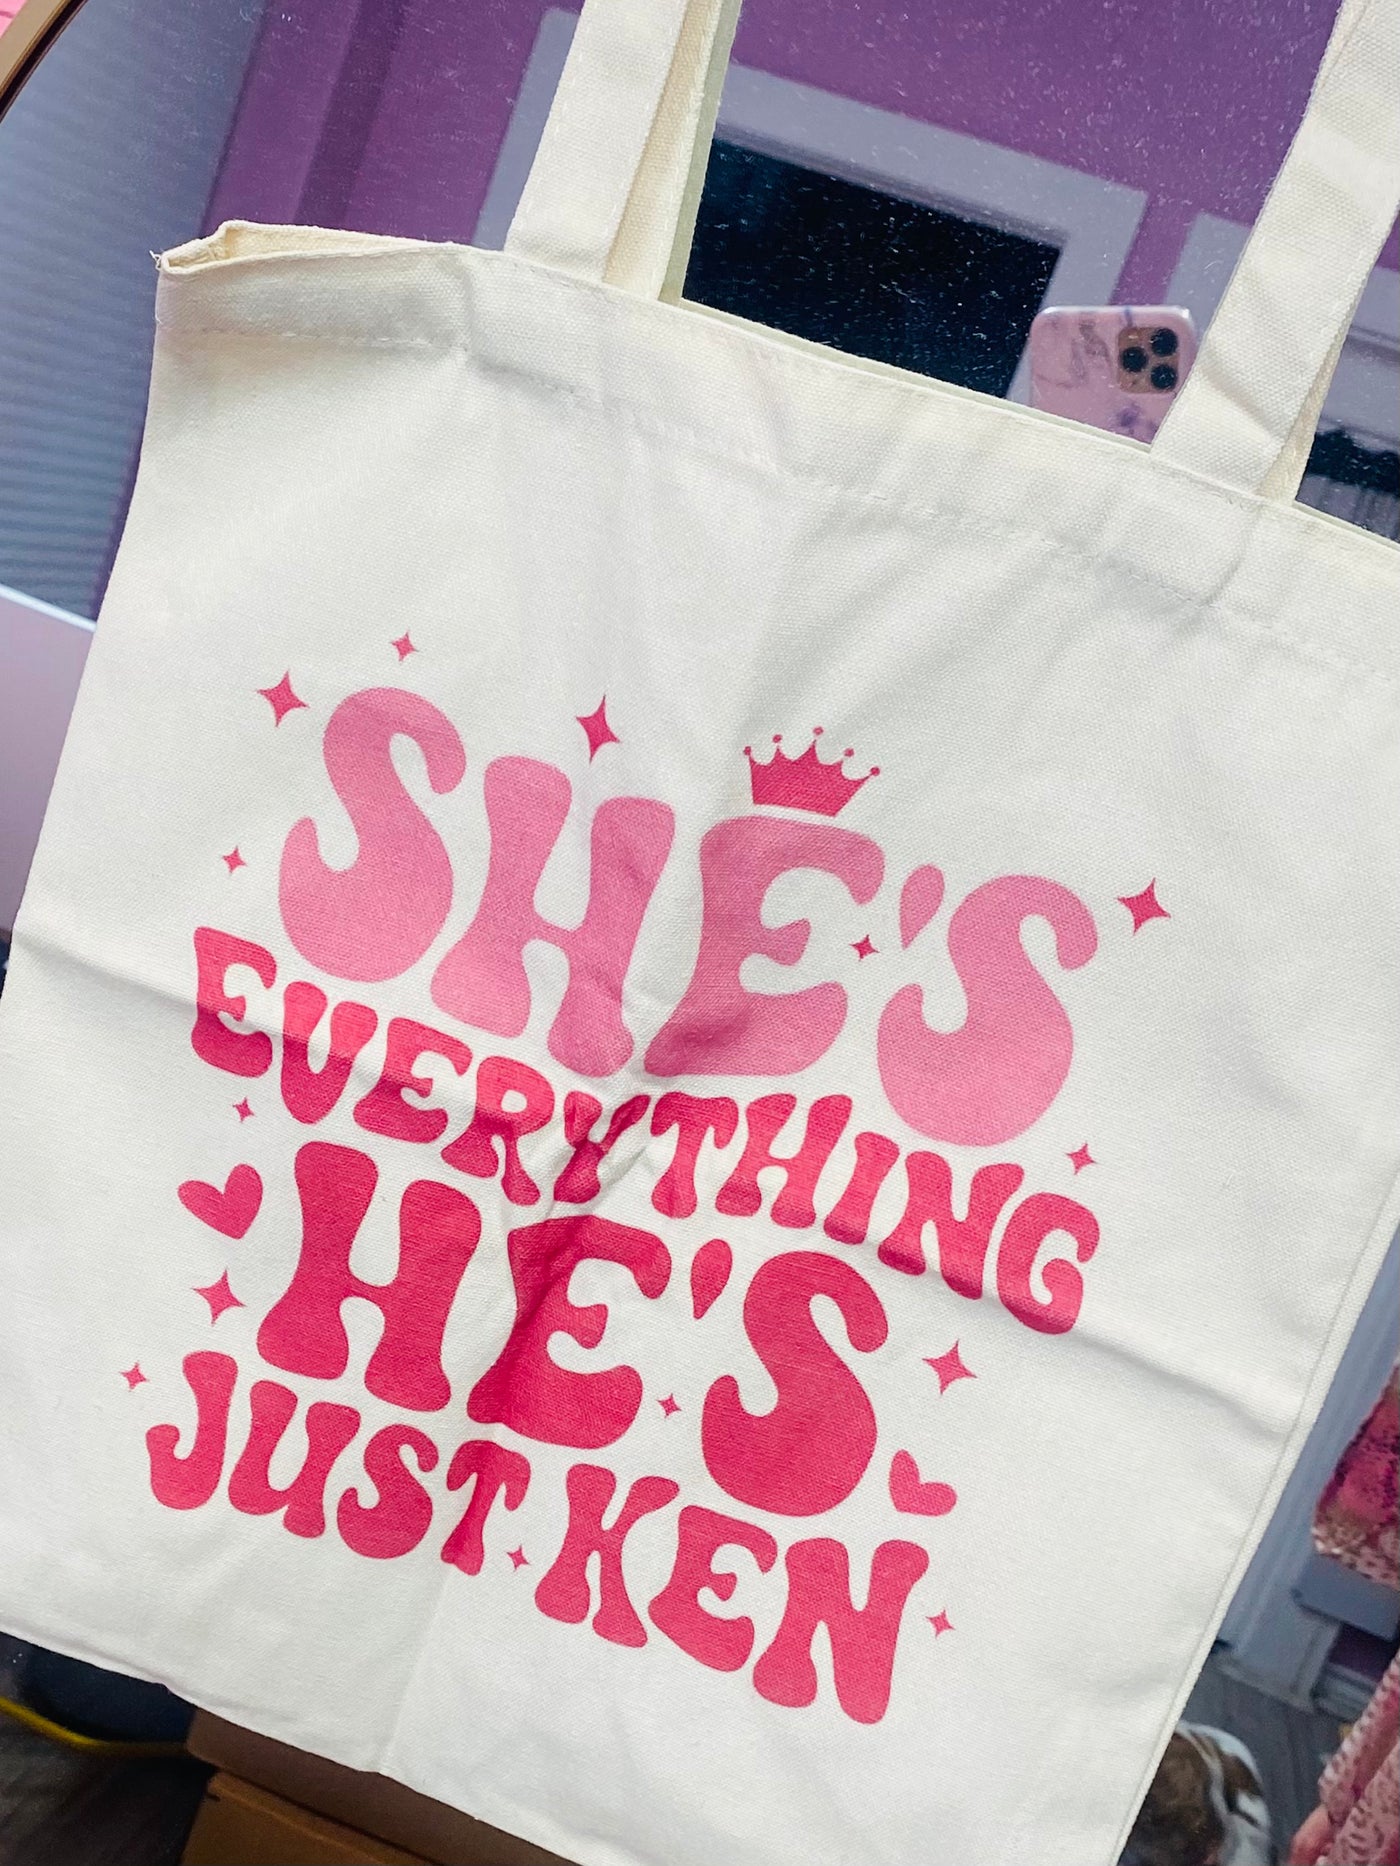 She's Everything, Just Ken Tote Bag